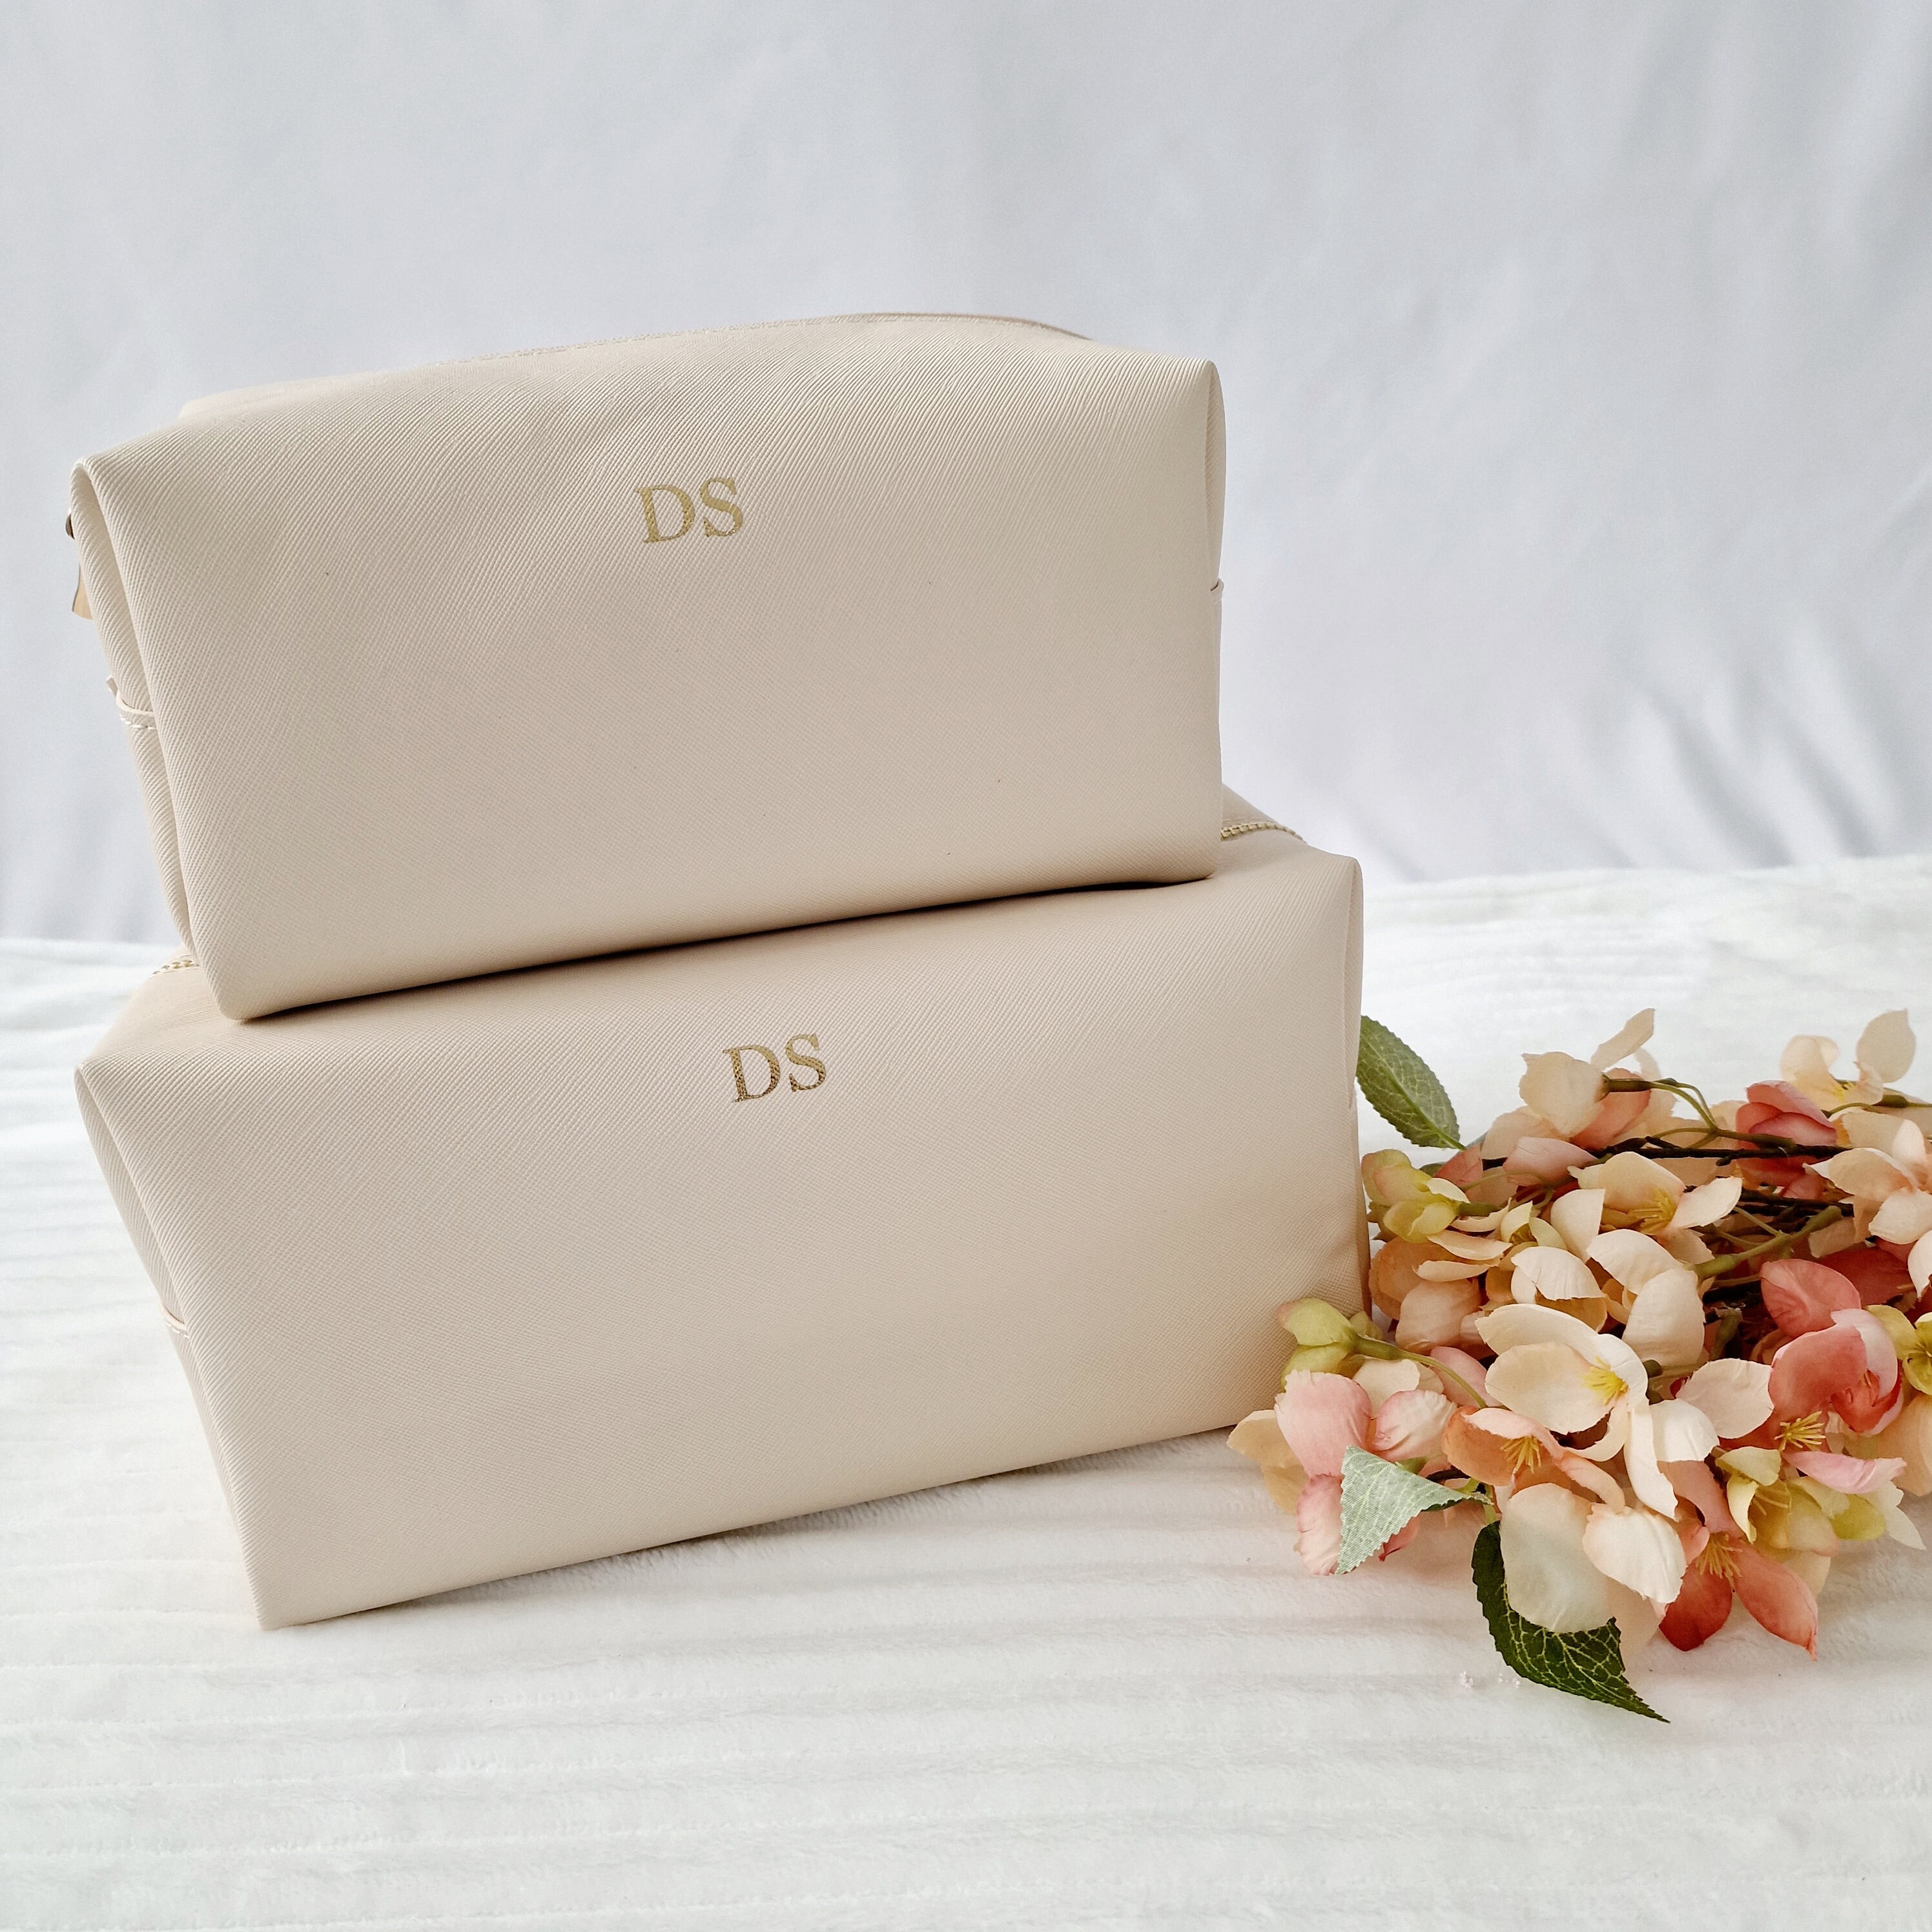 Monogrammed Makeup Bag, Cosmetic Bag with monogram – Pretty Personal Gifts